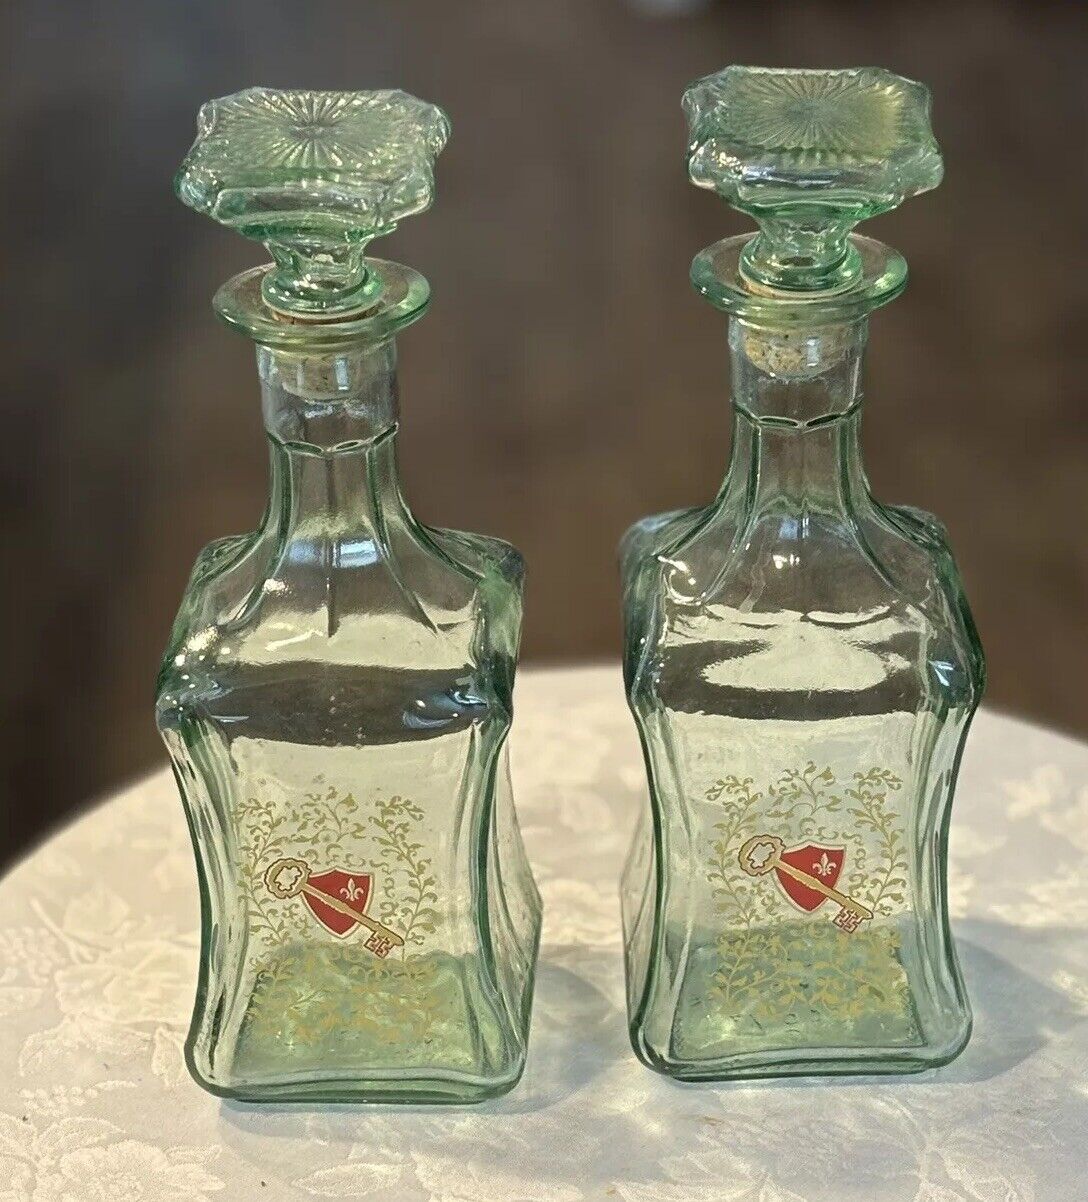 Old Fitzgerald Distillery Decanter Green Glass 1964 Original Stoppers Empty Used